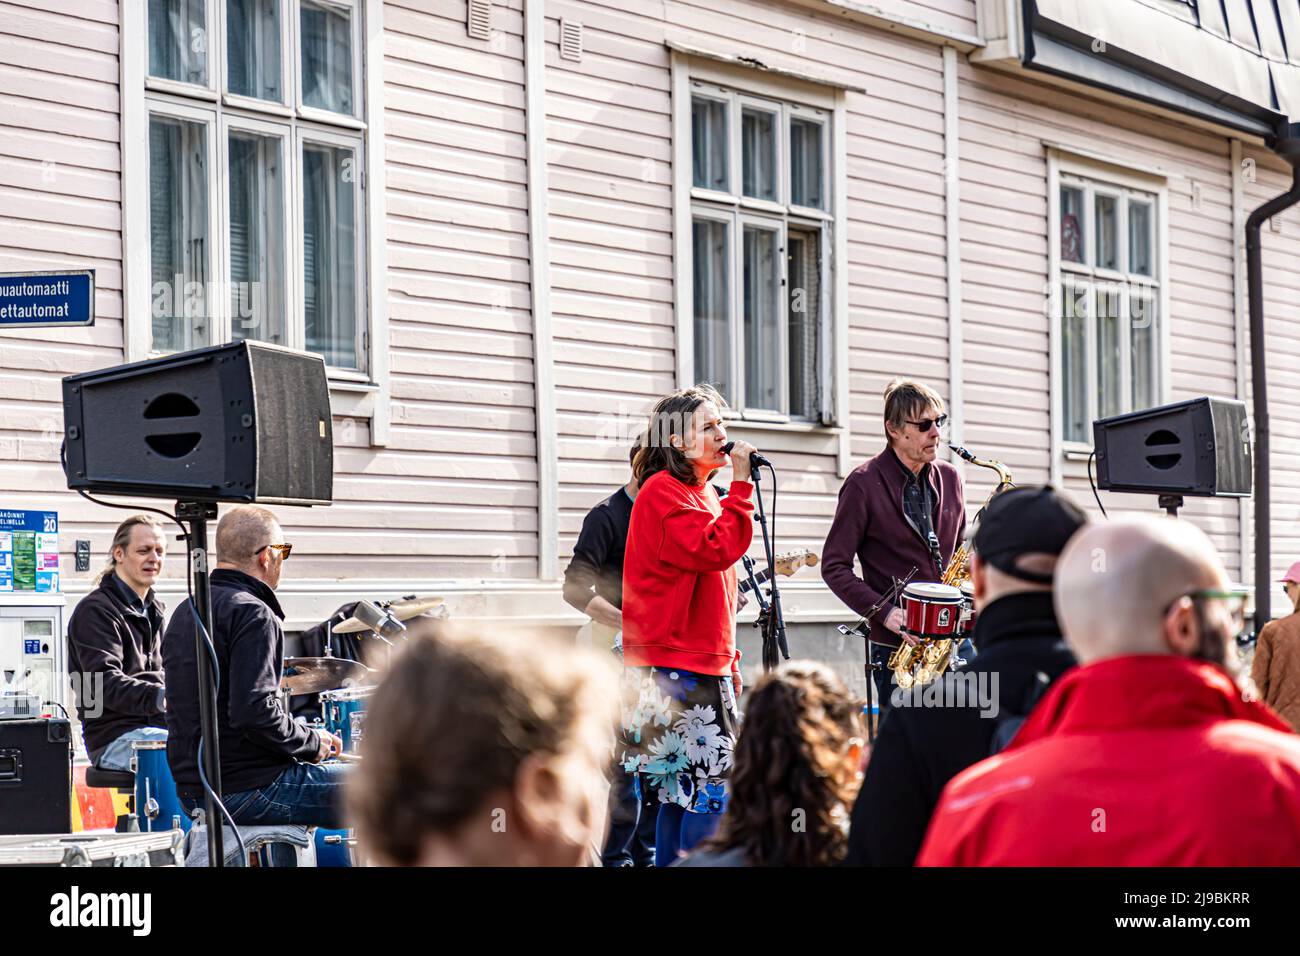 Band performing in the Vallilantie street during Puu-Vallilan Kevätjuhla, a spring celebration held in the Vallila wooden house district. Stock Photo